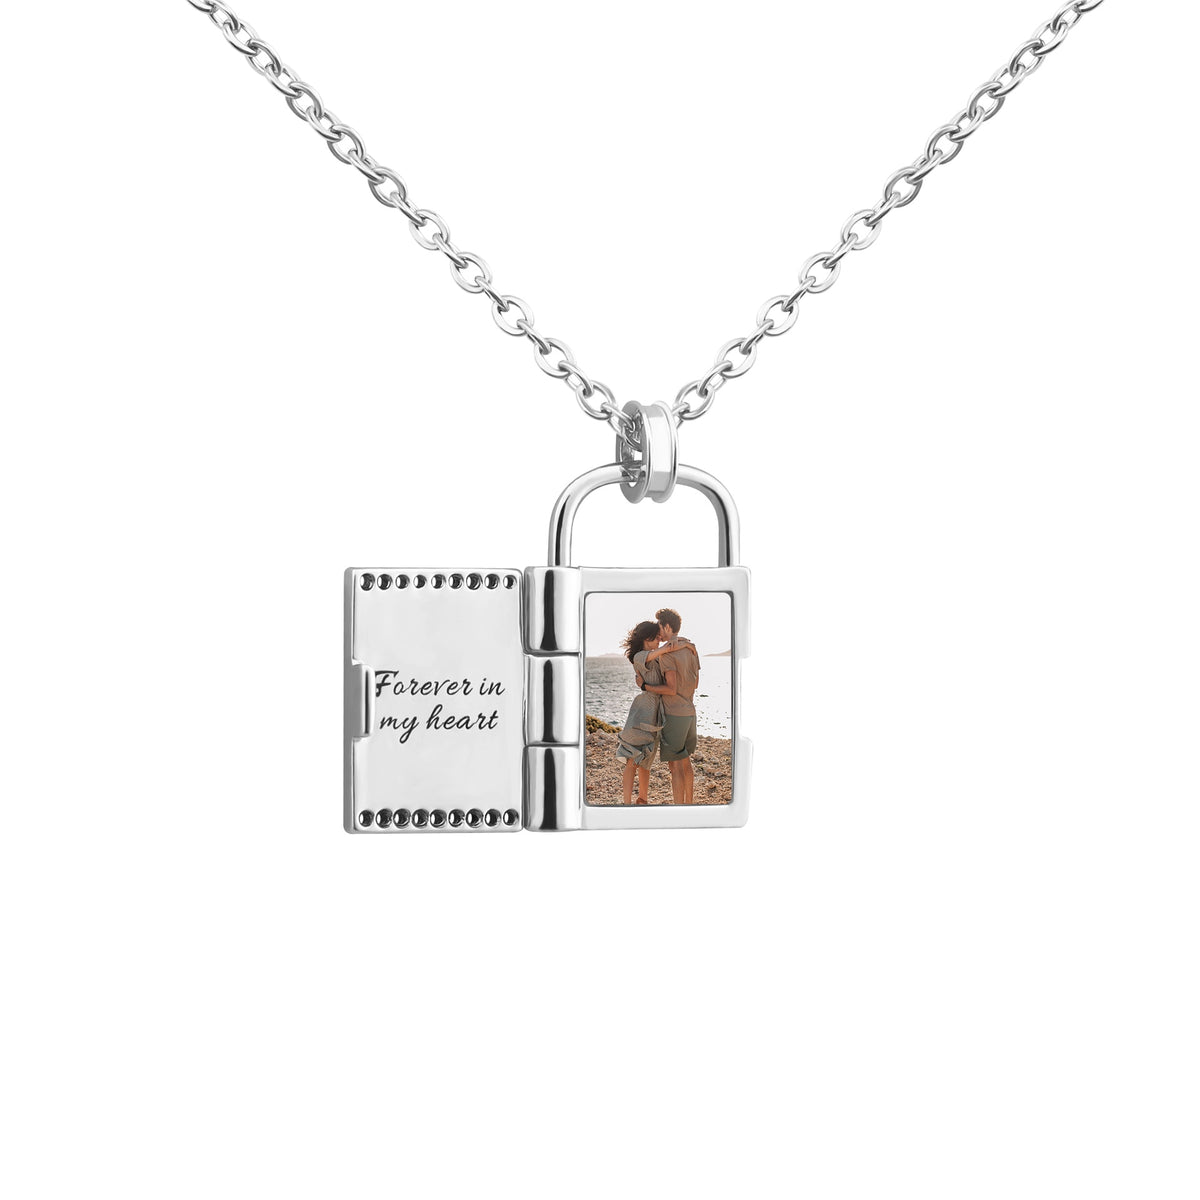 Custom Photo Envelope Necklace Can Open Engraved Pendant